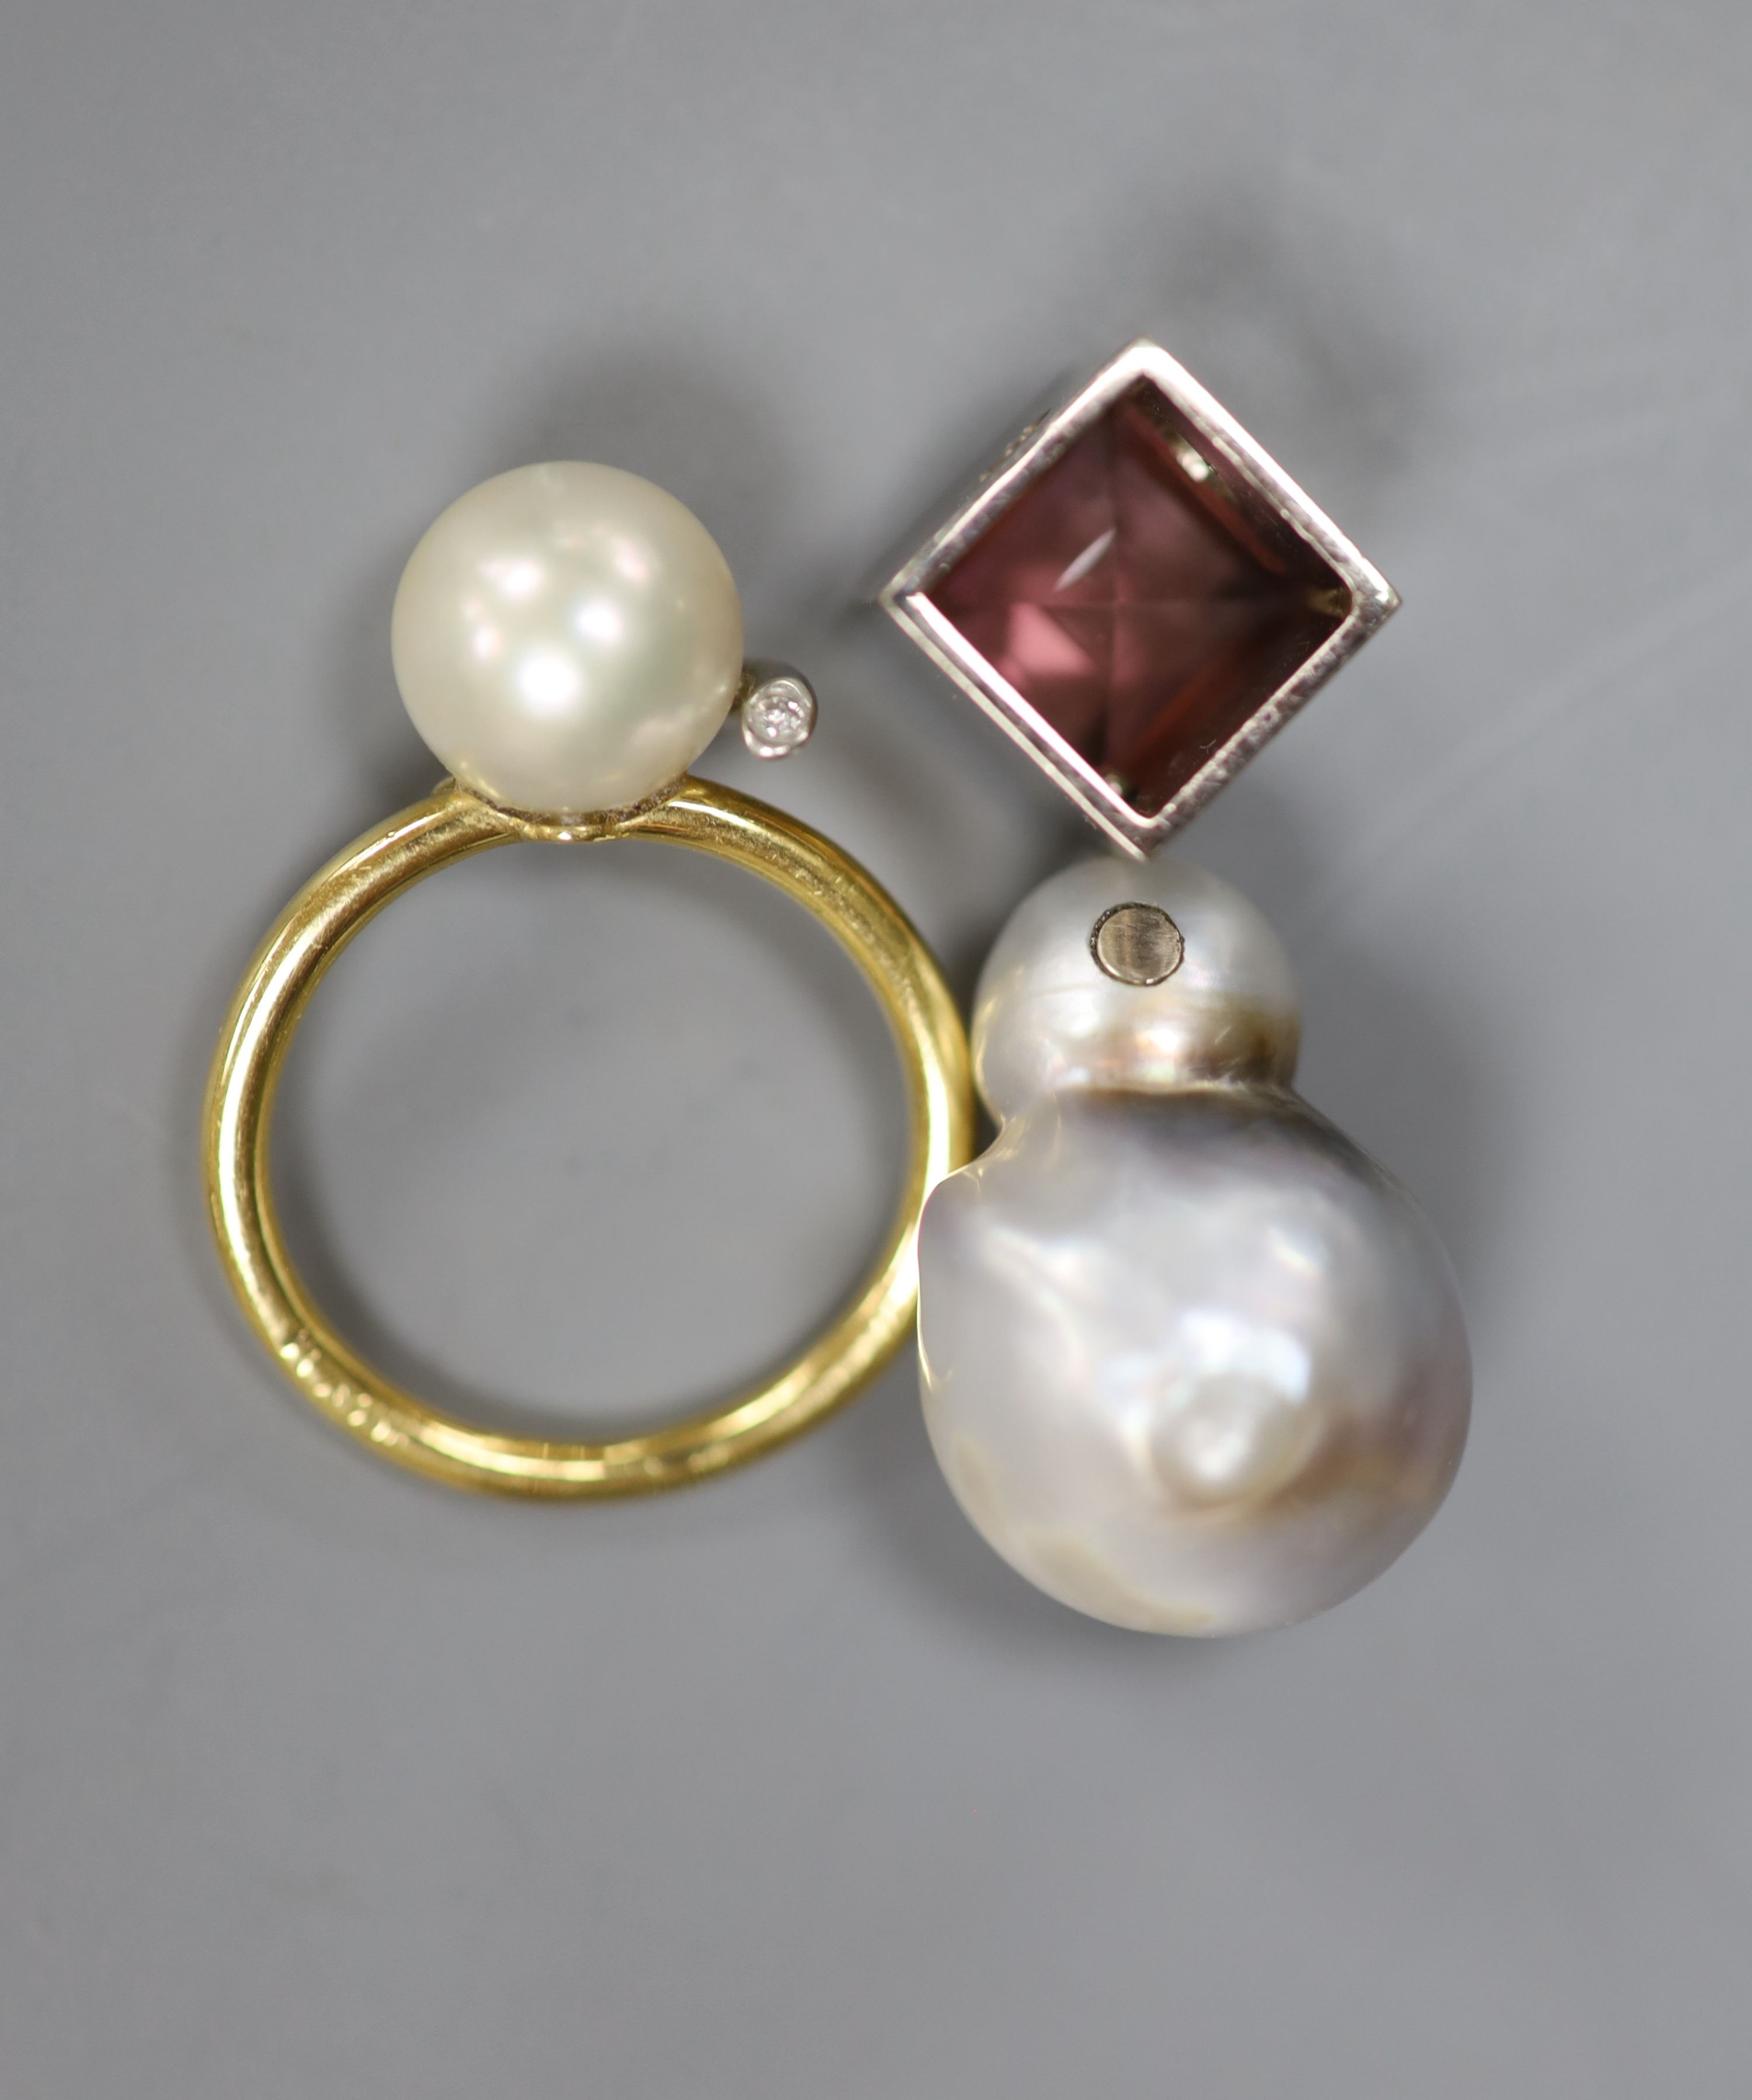 A modern 585 white metal, baroque pearl and pink tourmaline set pendant and a yellow metal cultured pearl and diamond chip set ring